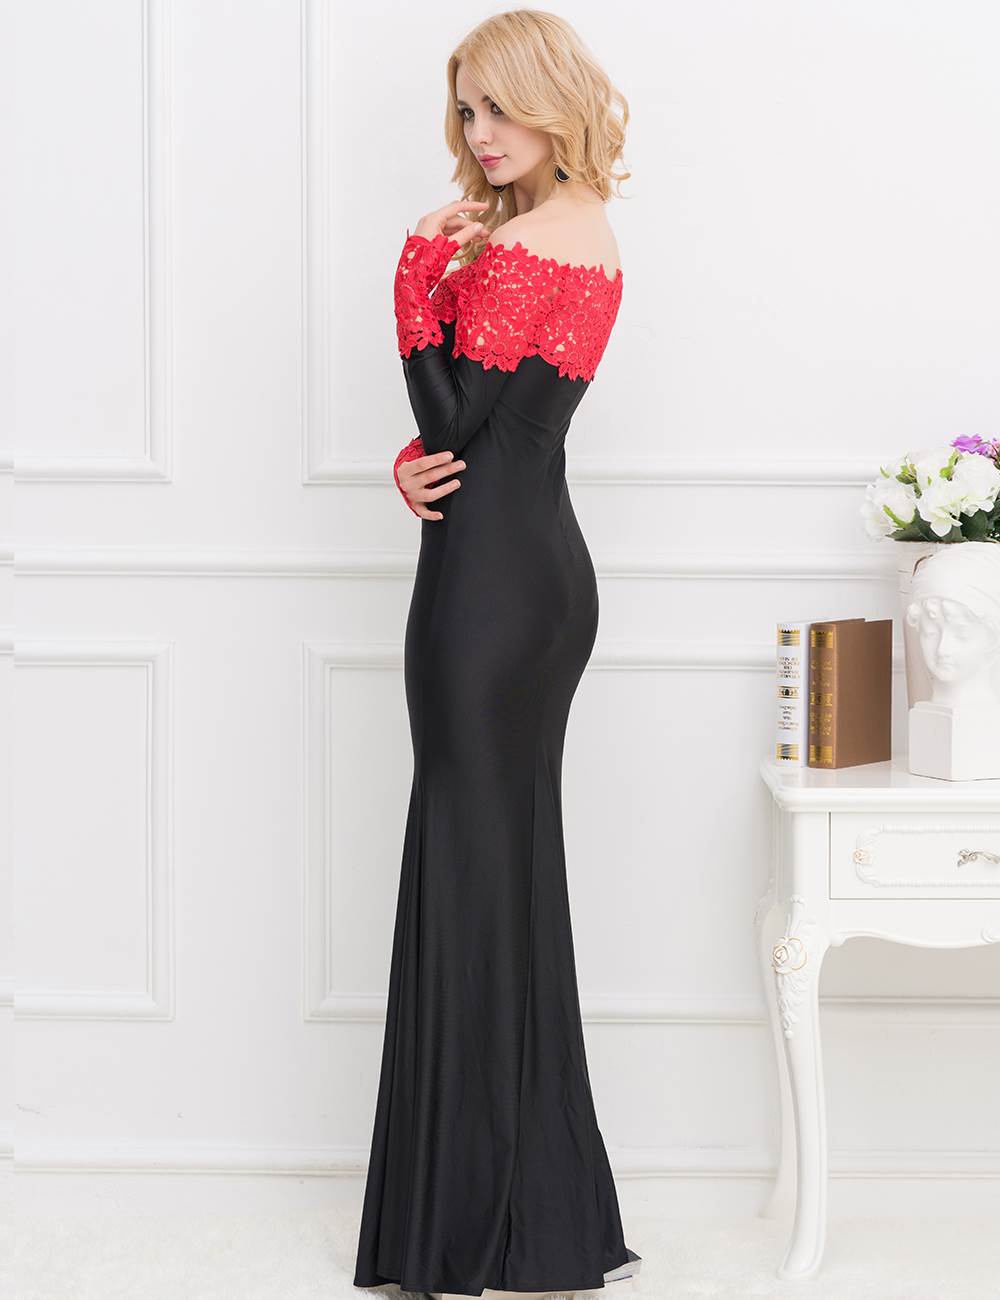 Buy The High Performance Price Ratio Evening Dress Online At Ohyeah888.com